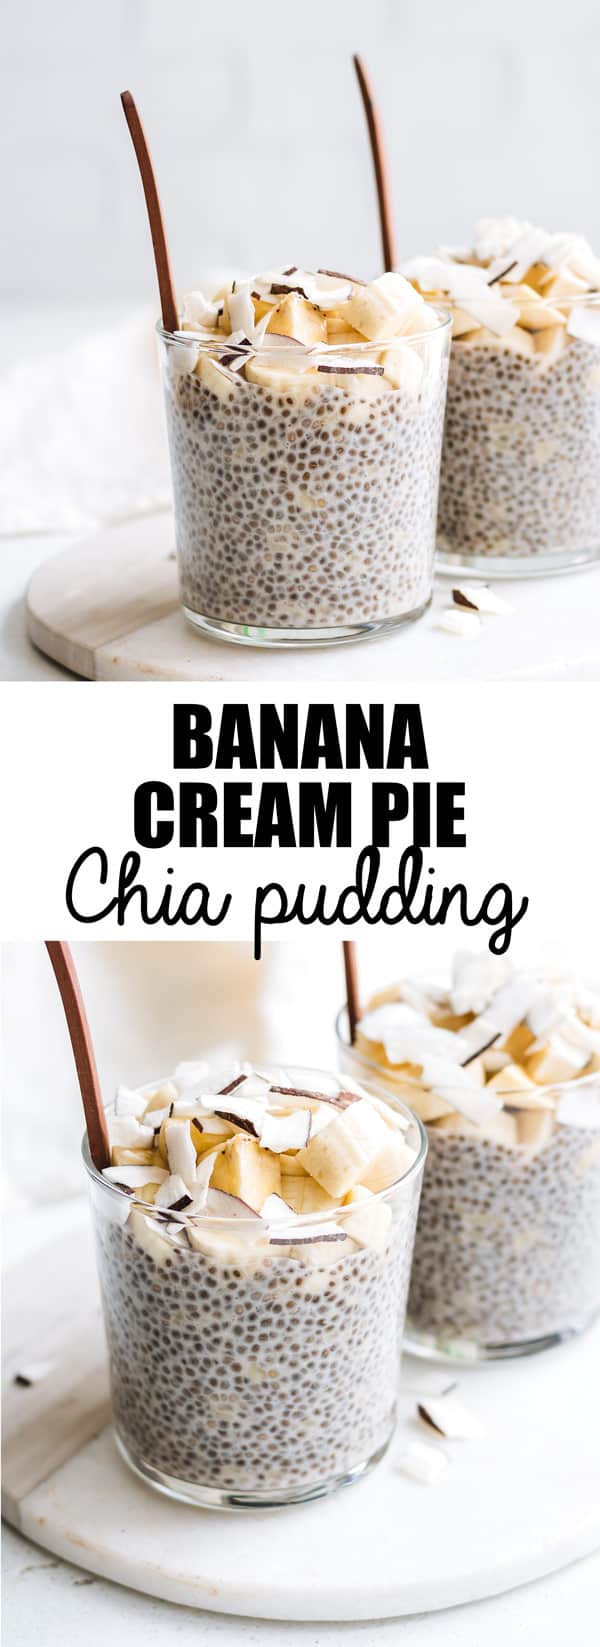 This banana cream pie chia pudding is a healthy recipe loaded wit creamy banana flavour. Vegan+ Gluten-free